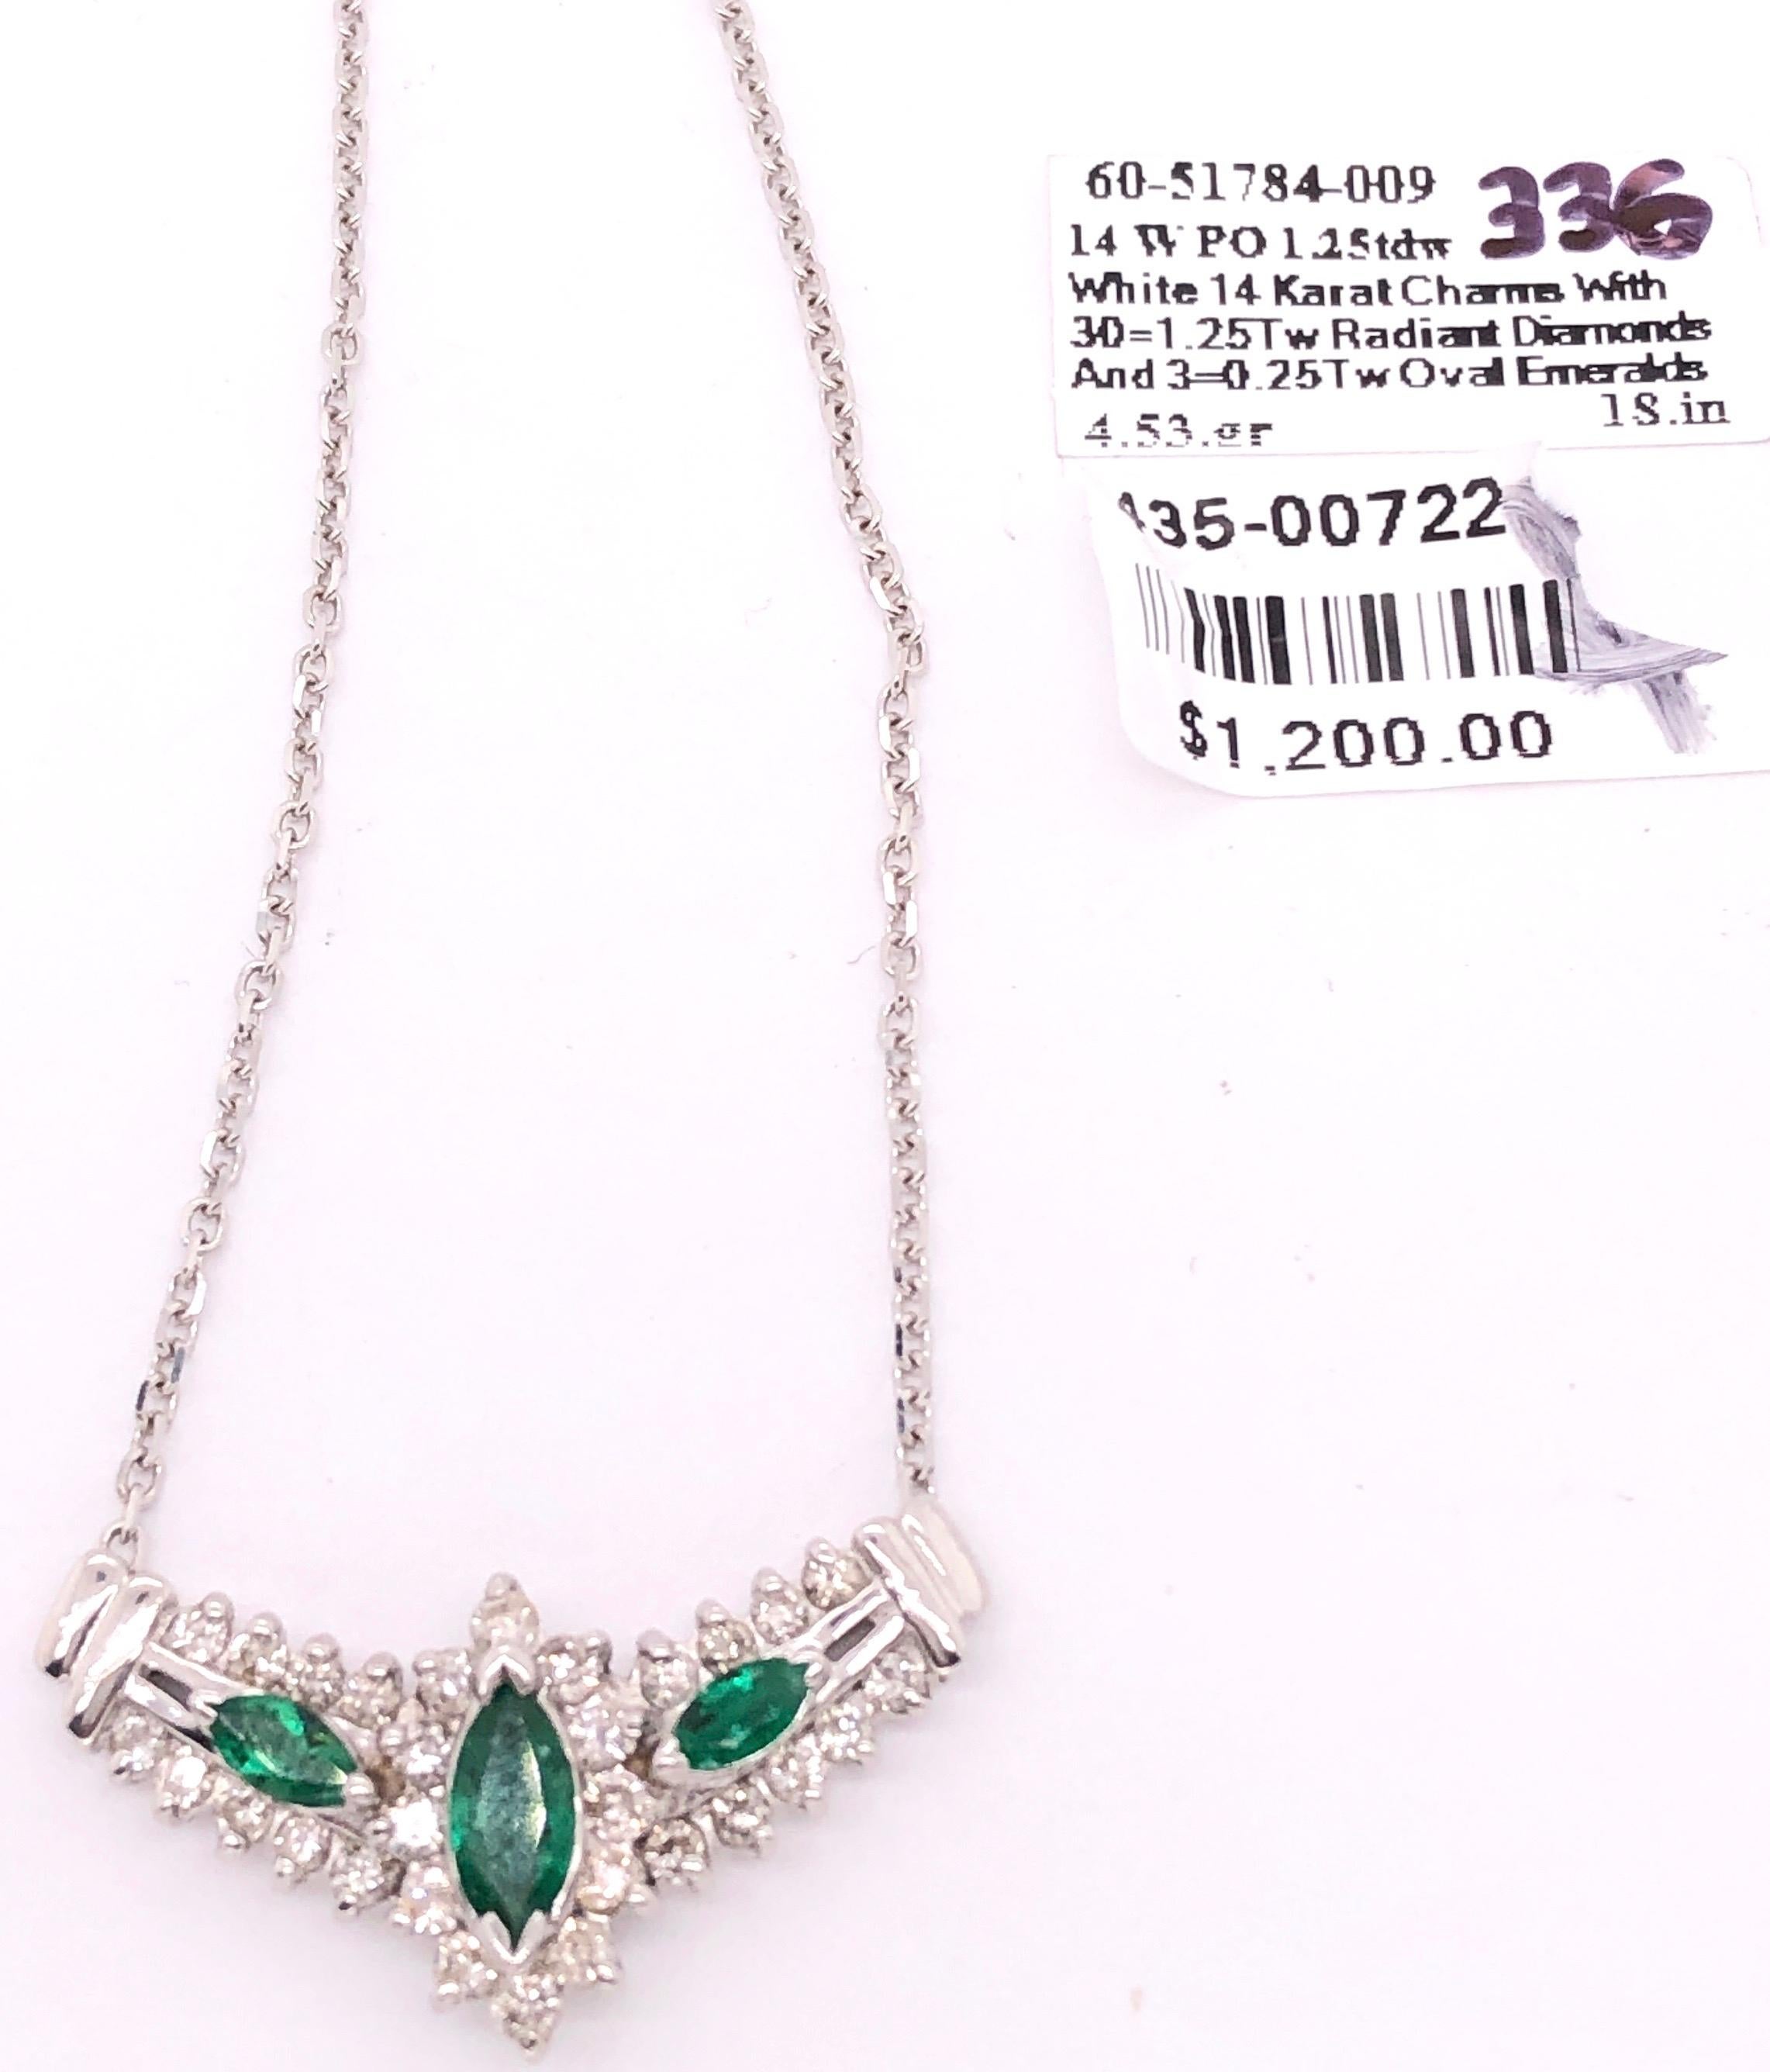 14 Karat White Gold Necklace with Soldered Diamond and Emerald Pendant 4